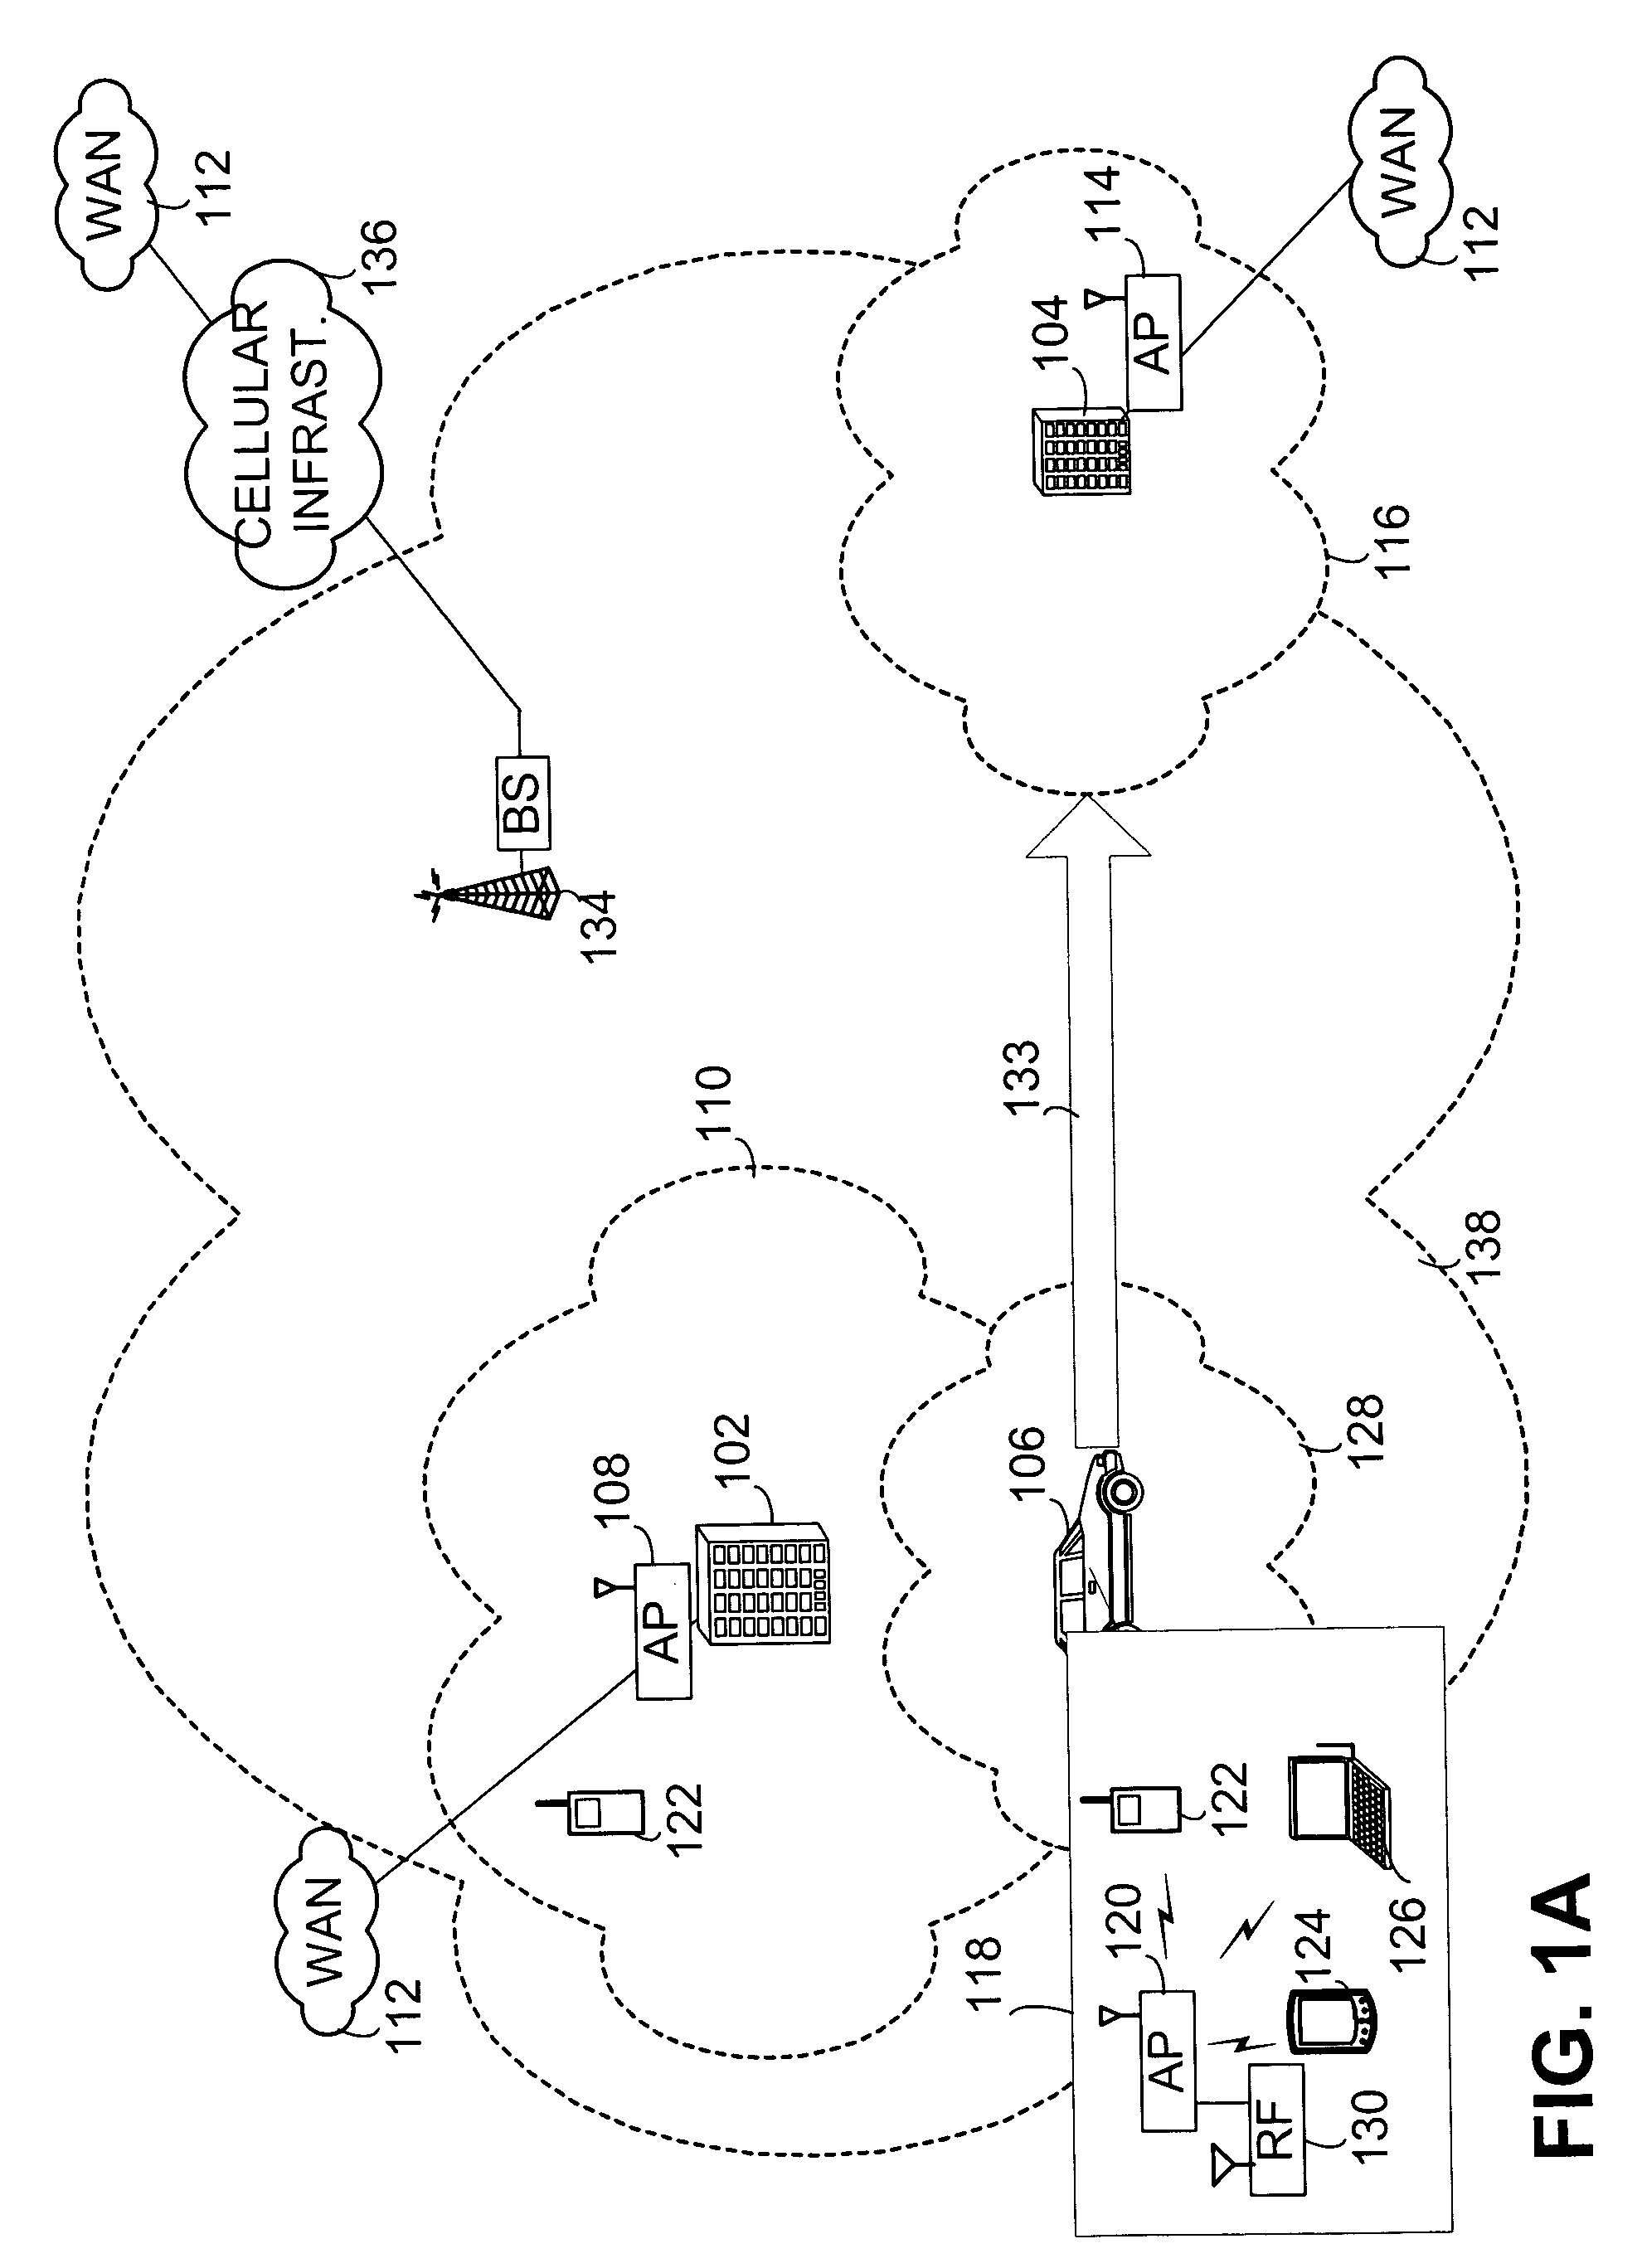 System and method for servicing communications using both fixed and mobile wirless networks